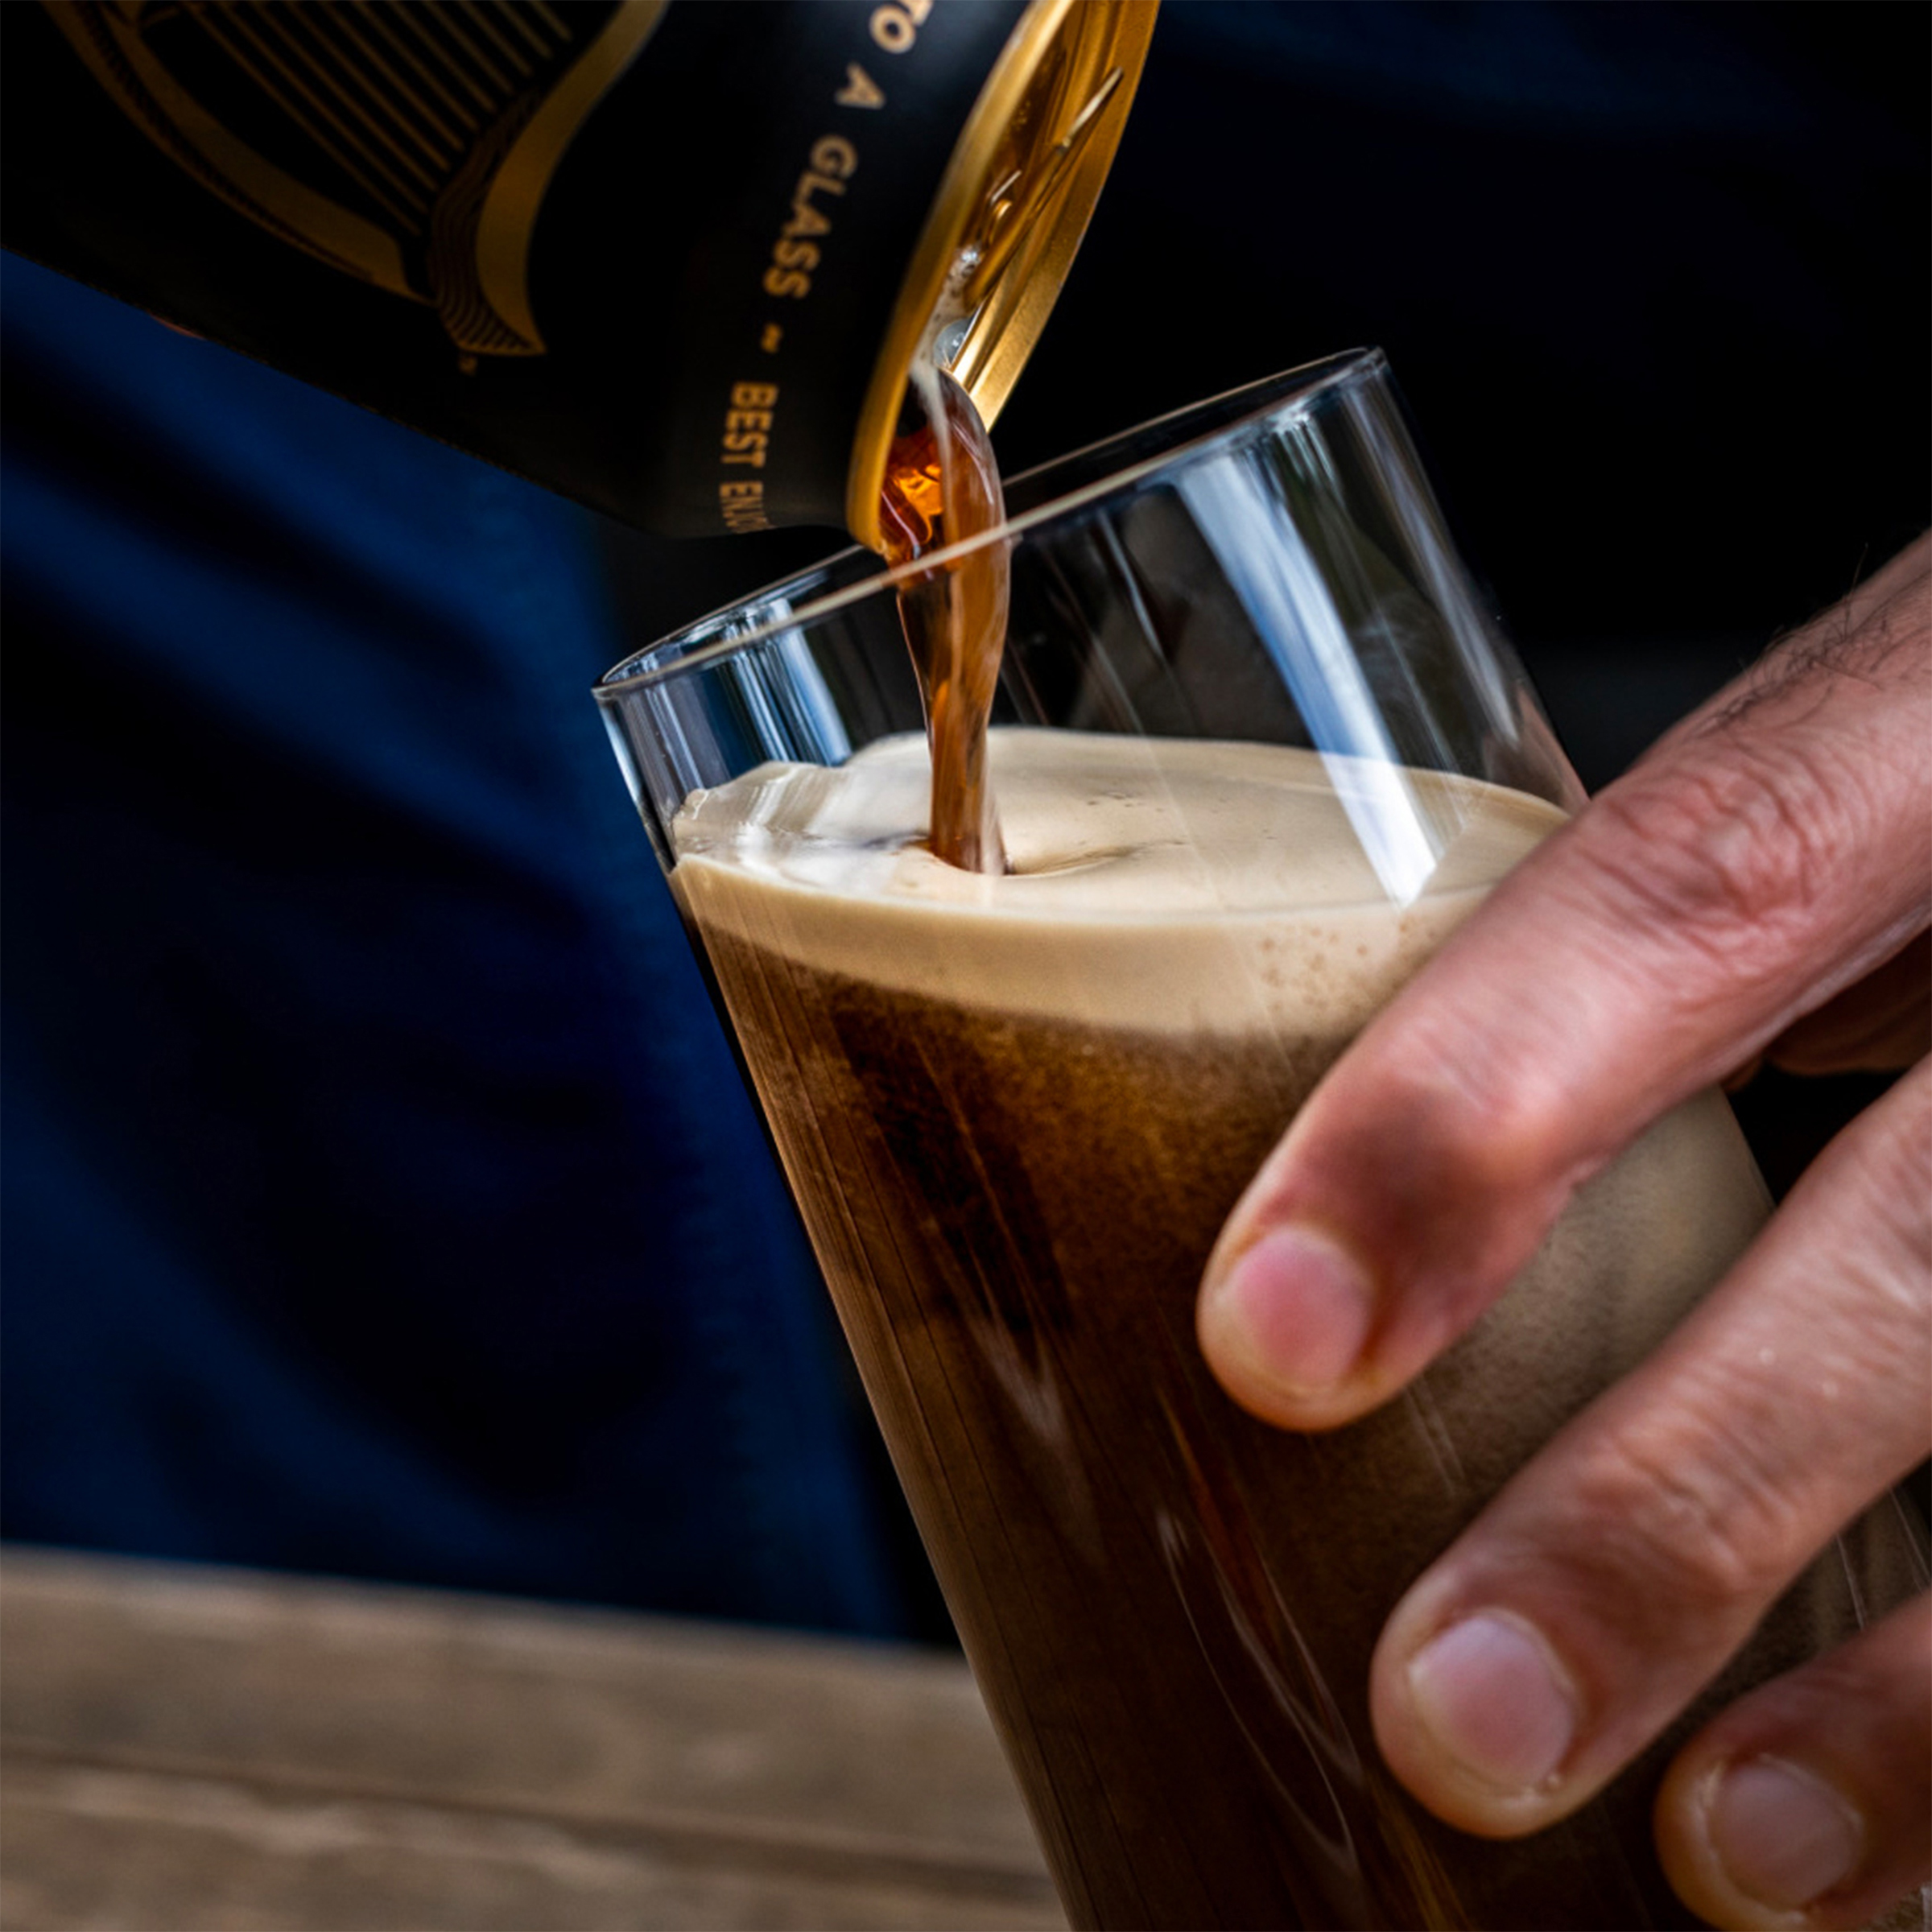 Pouring Guinness